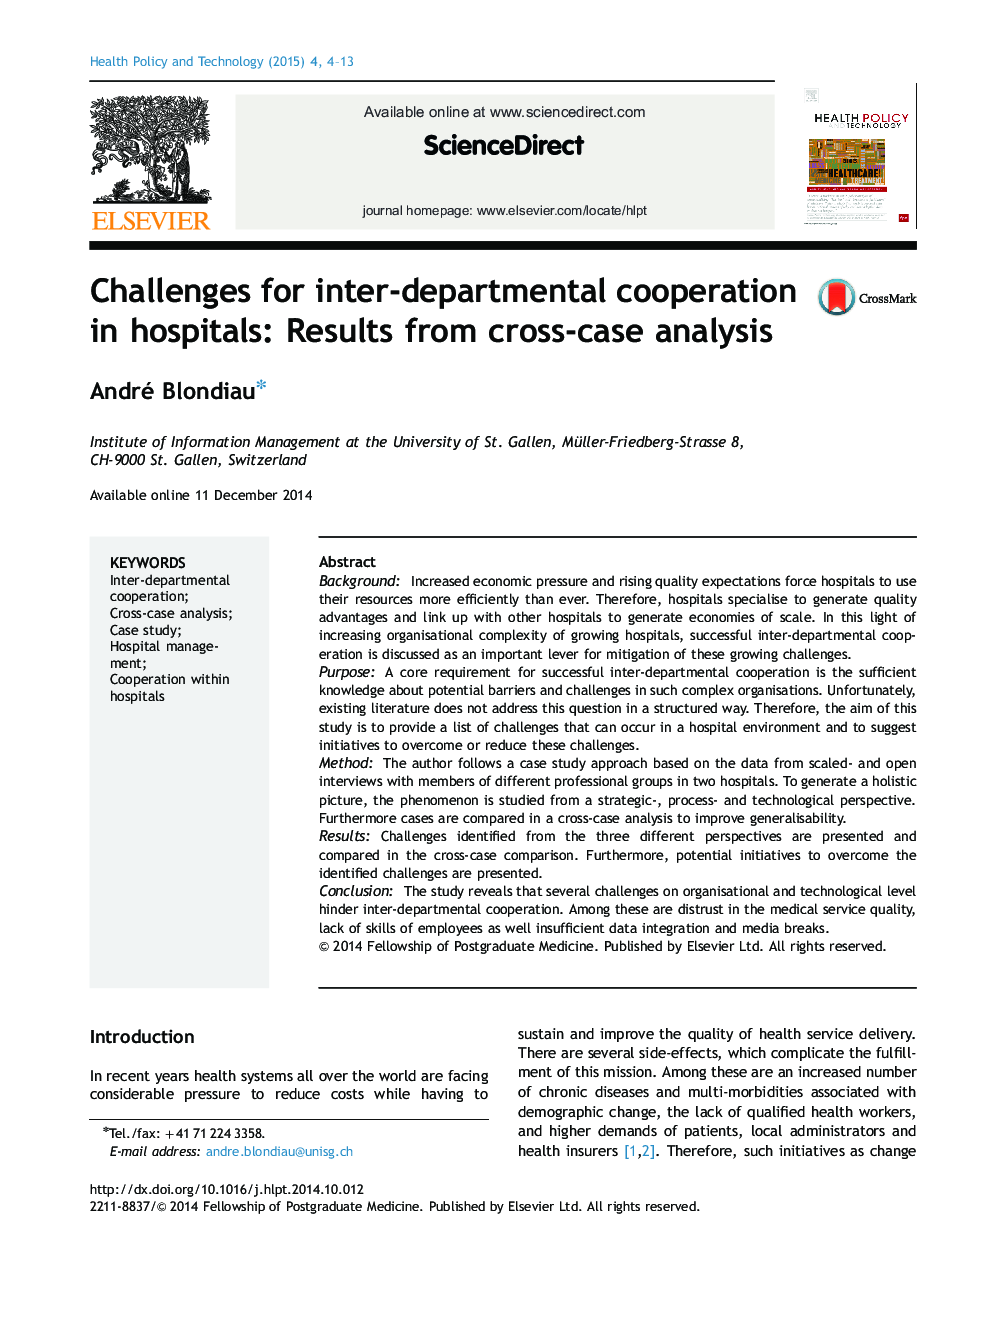 Challenges for inter-departmental cooperation in hospitals: Results from cross-case analysis